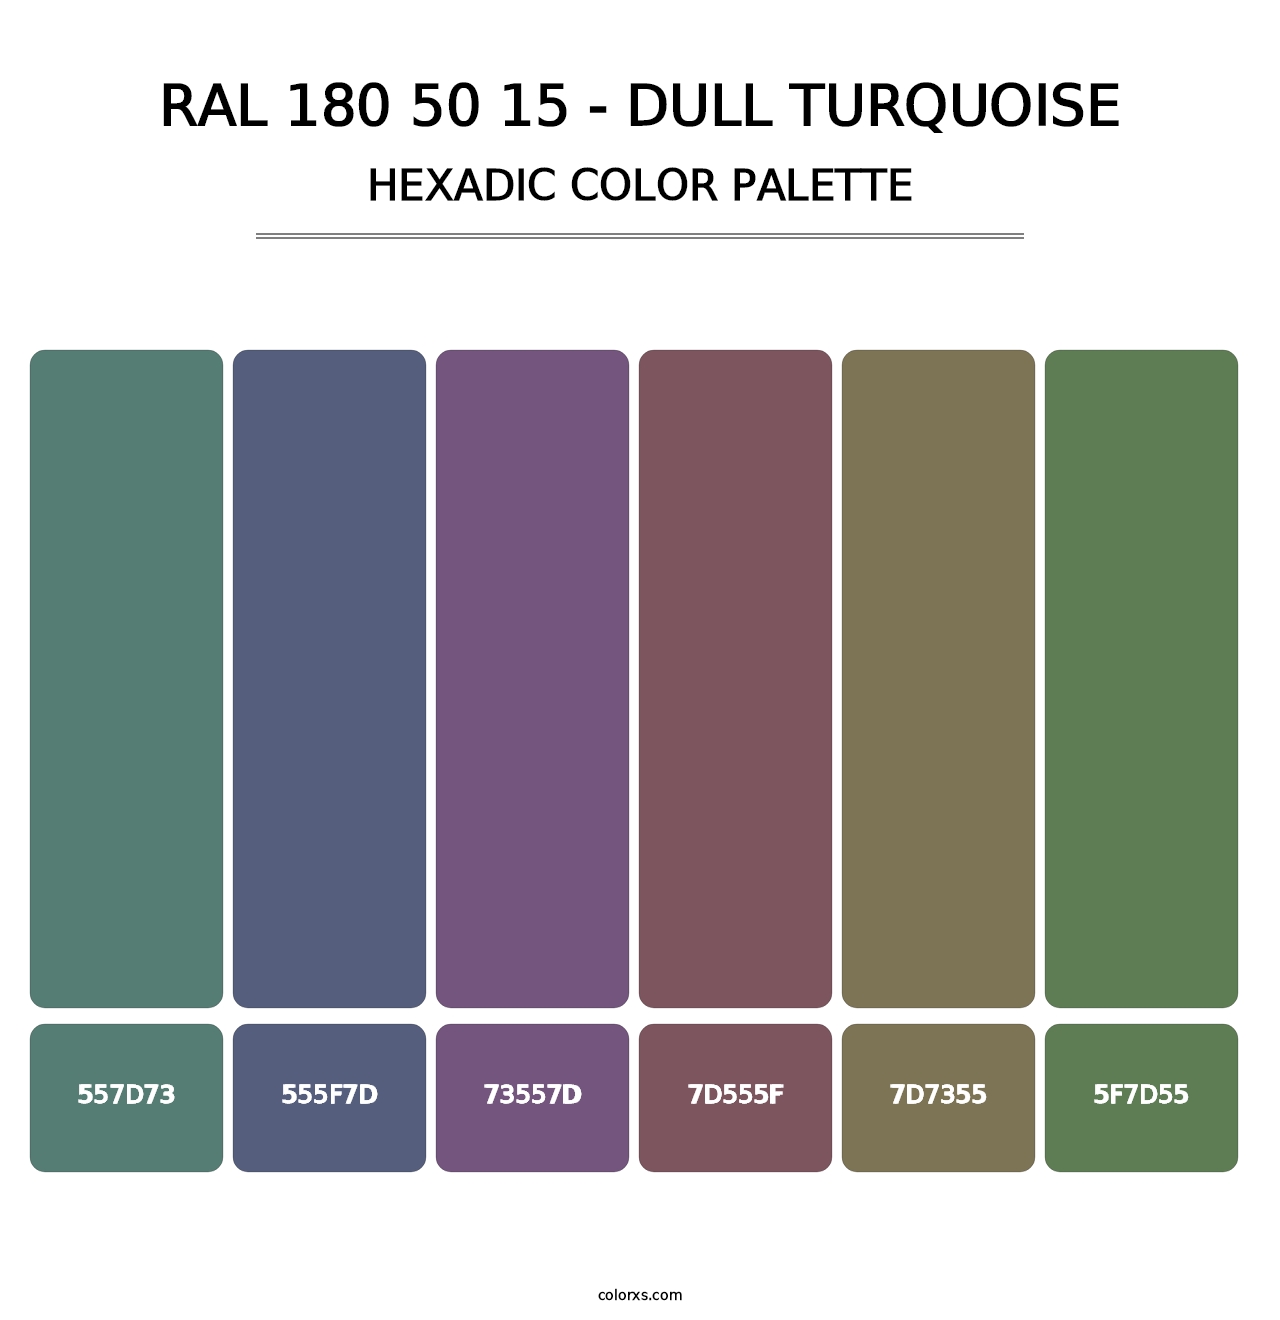 RAL 180 50 15 - Dull Turquoise - Hexadic Color Palette